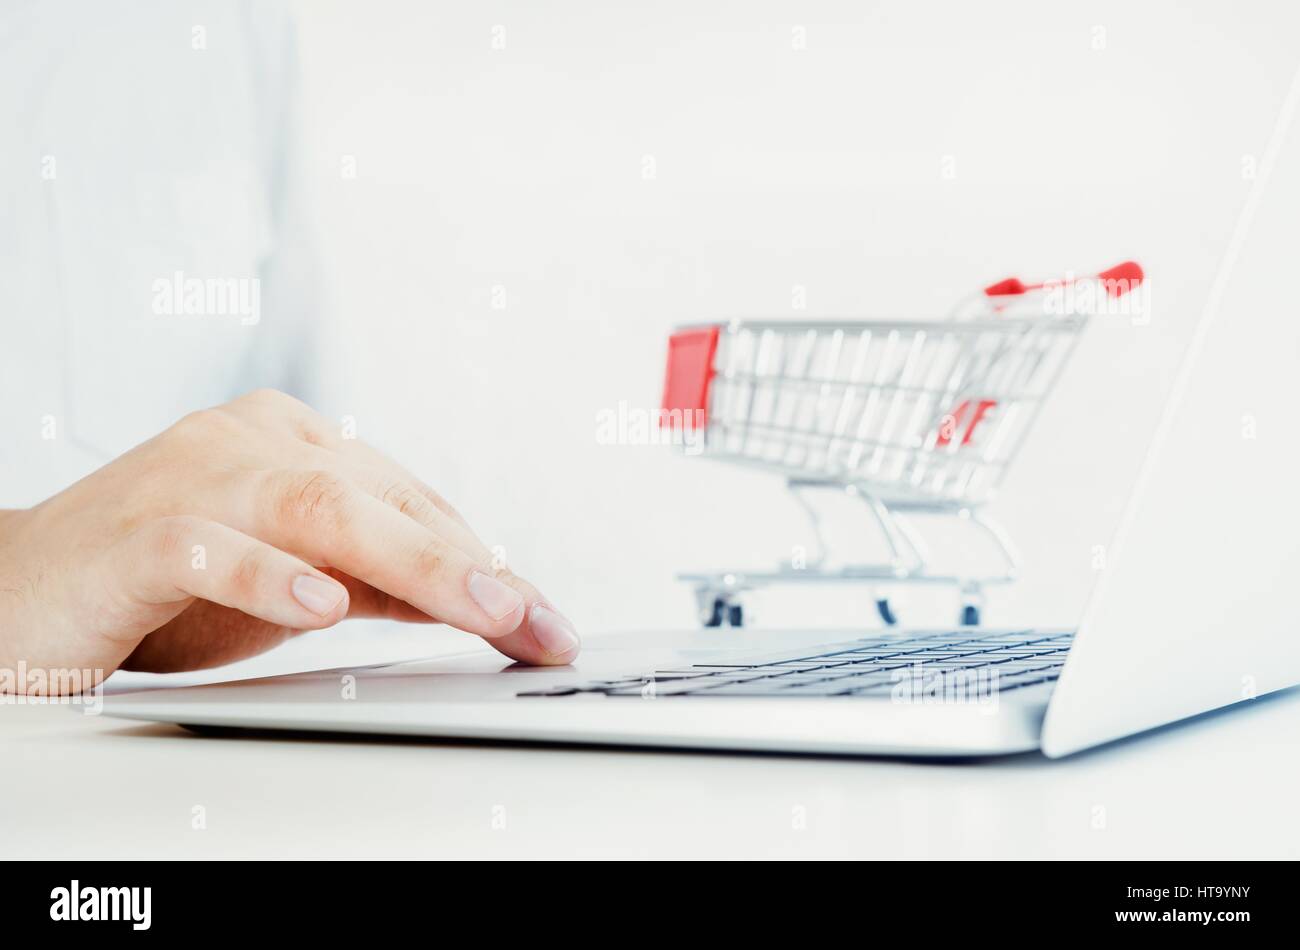 Man using laptop for internet shopping. Bright composition with shopping trolley in background. Stock Photo